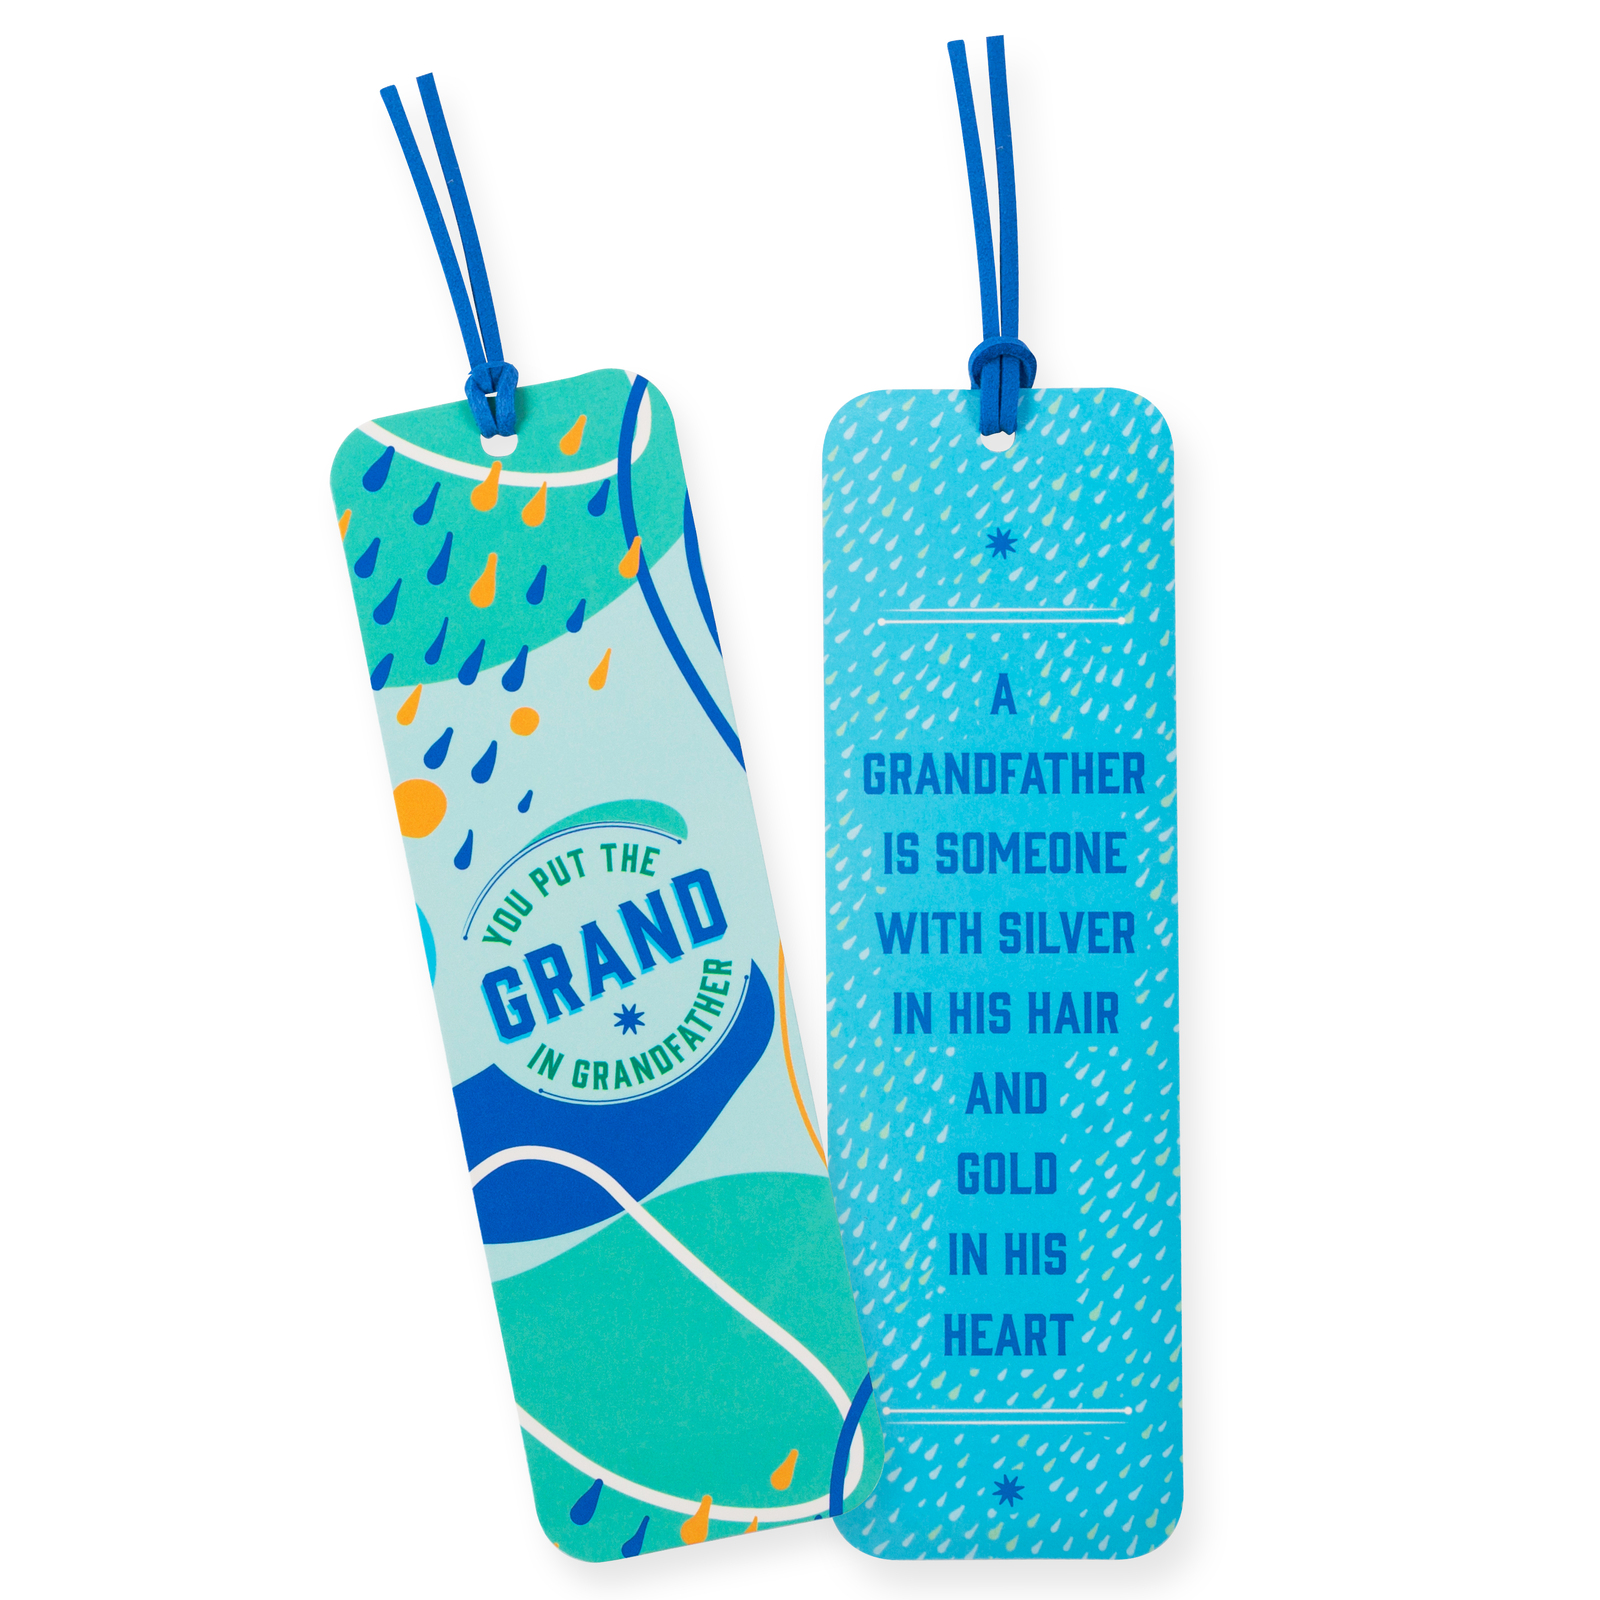 Grandfather Bookmark - Pack of 12 ($1.55 ea)